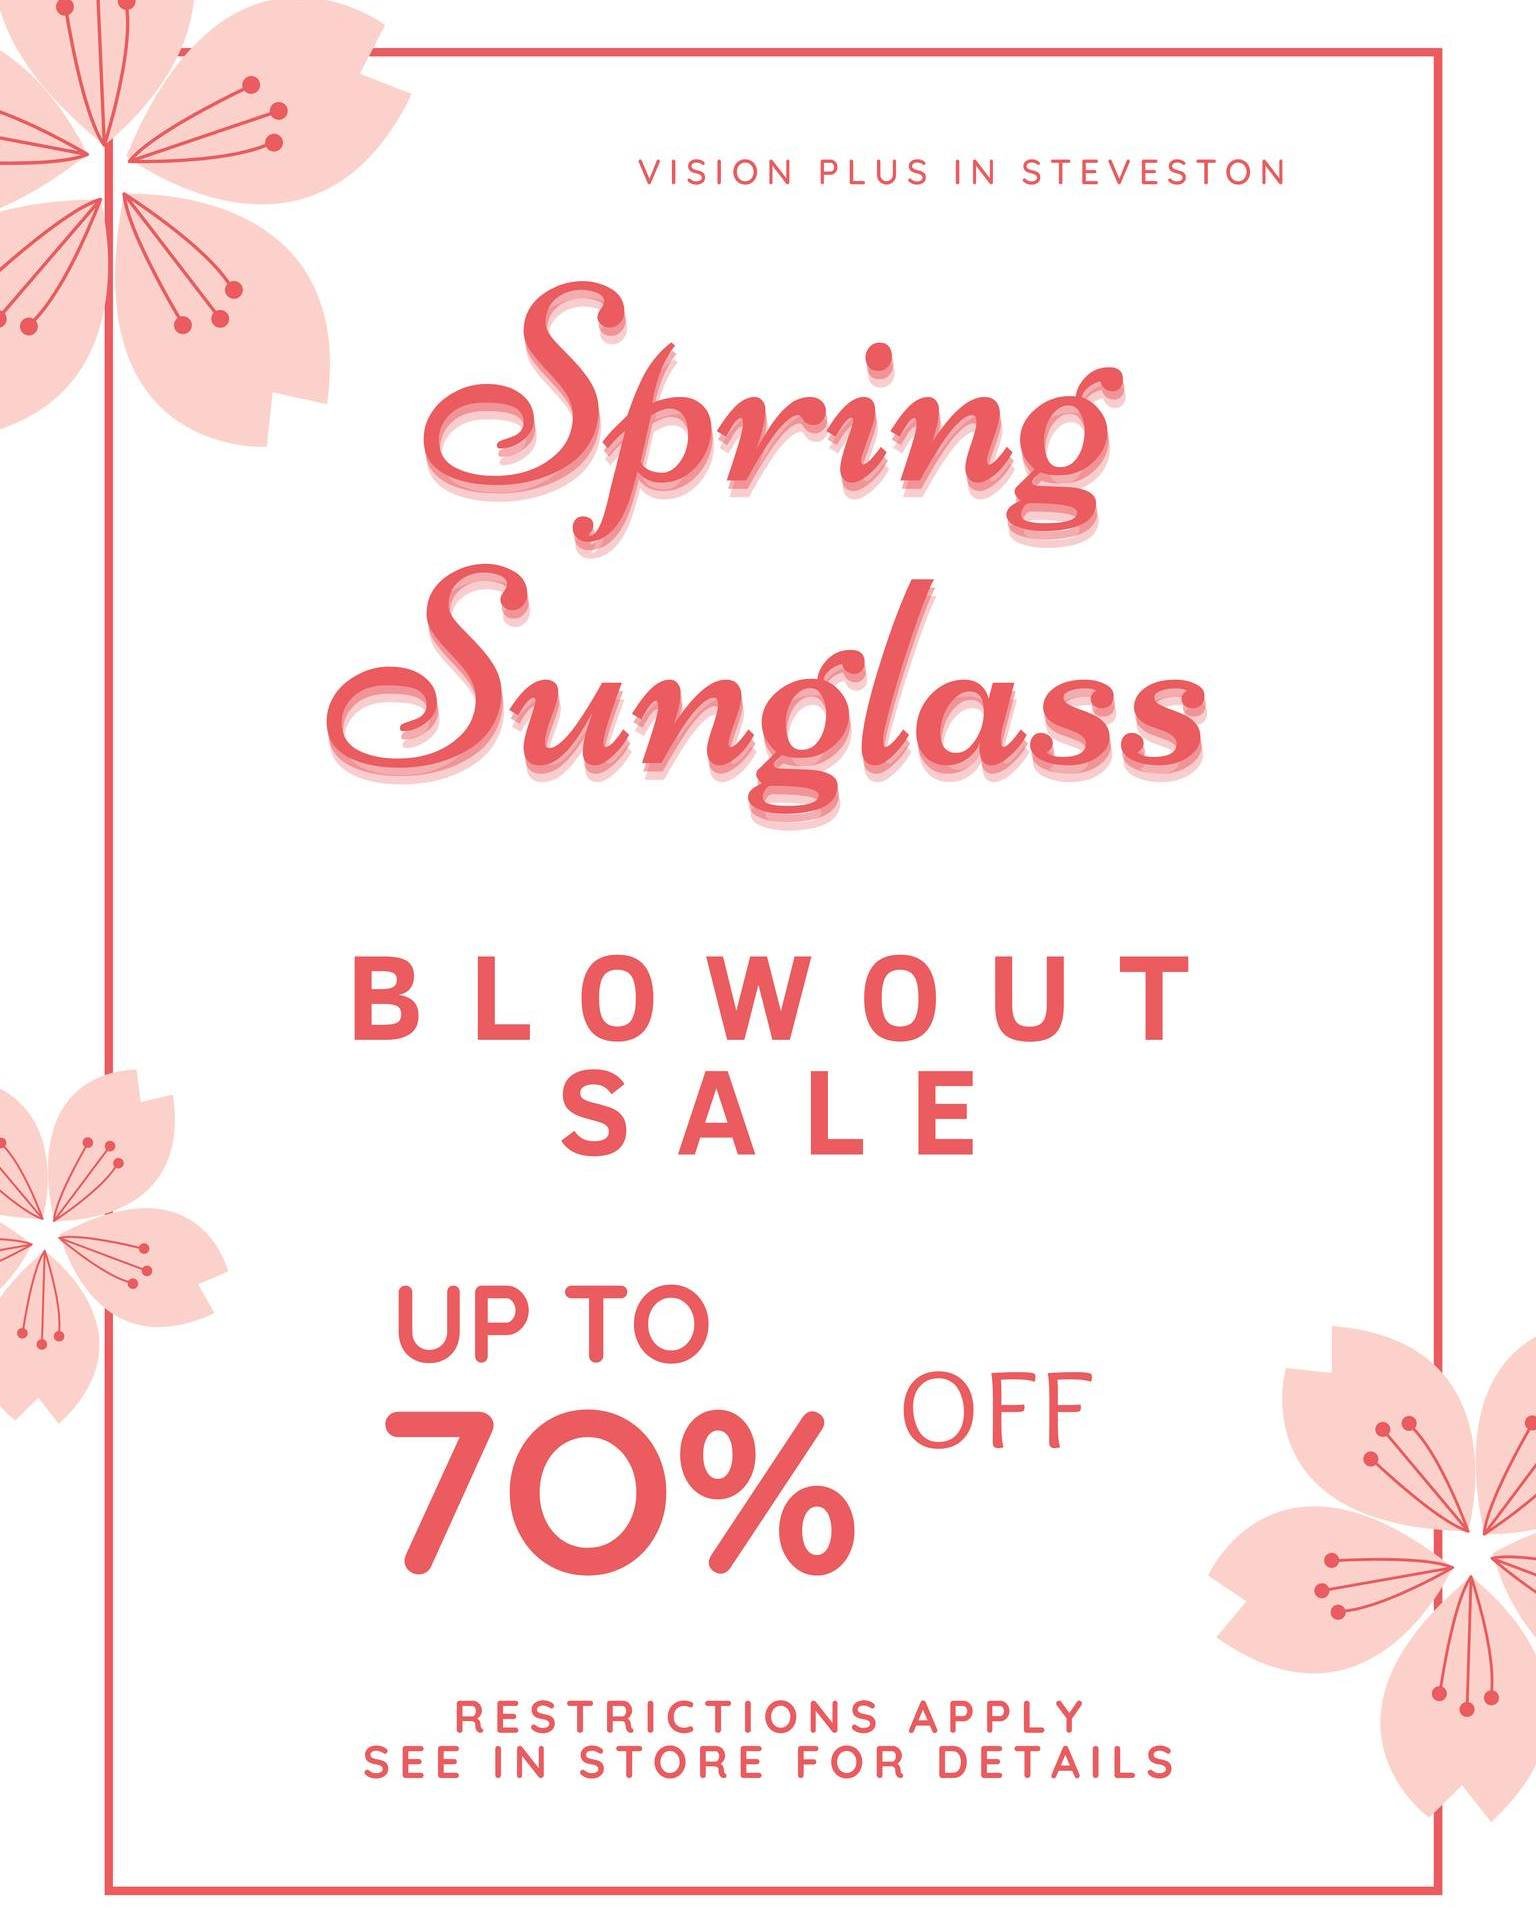 Sun is out now, so time to put your shades on! ☀️Check in store now for big savings on selected sunglasses!

#eyecare #optometry #contactlenses #vision #eyehealth #eyeexam #health #optometrists #optometristsofinstagram #optometriststoday #seegoodbyop